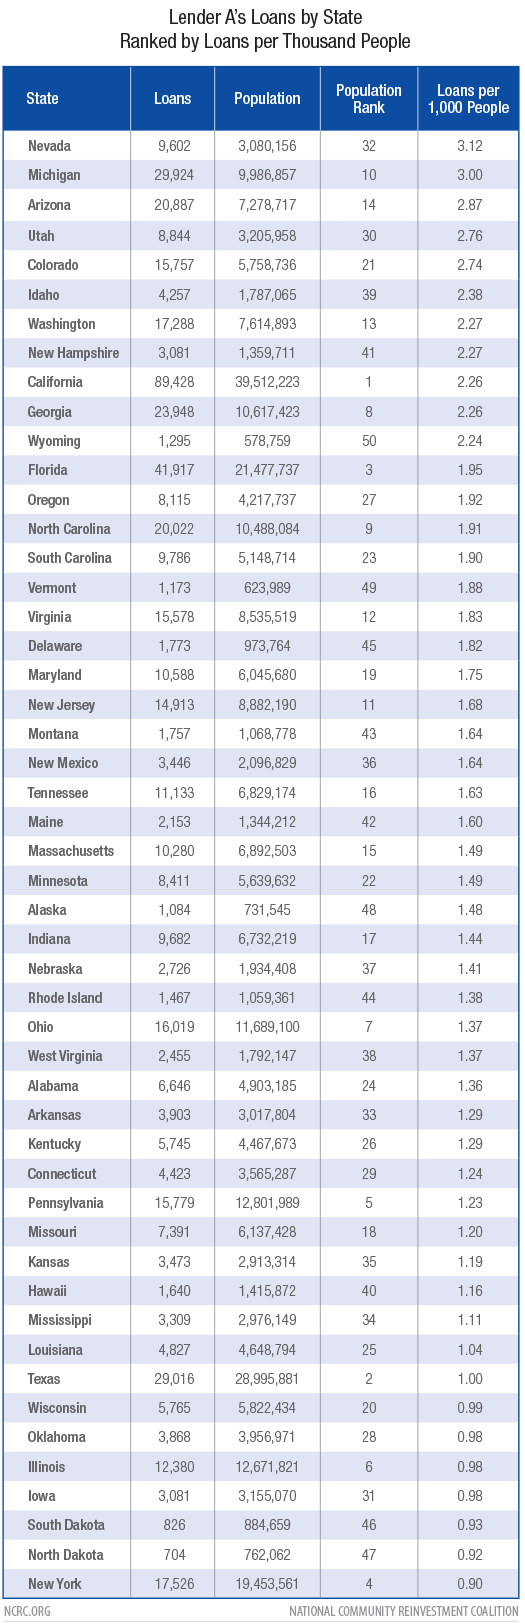 Lender A Loans by State Ranked by Loans per Thousand People